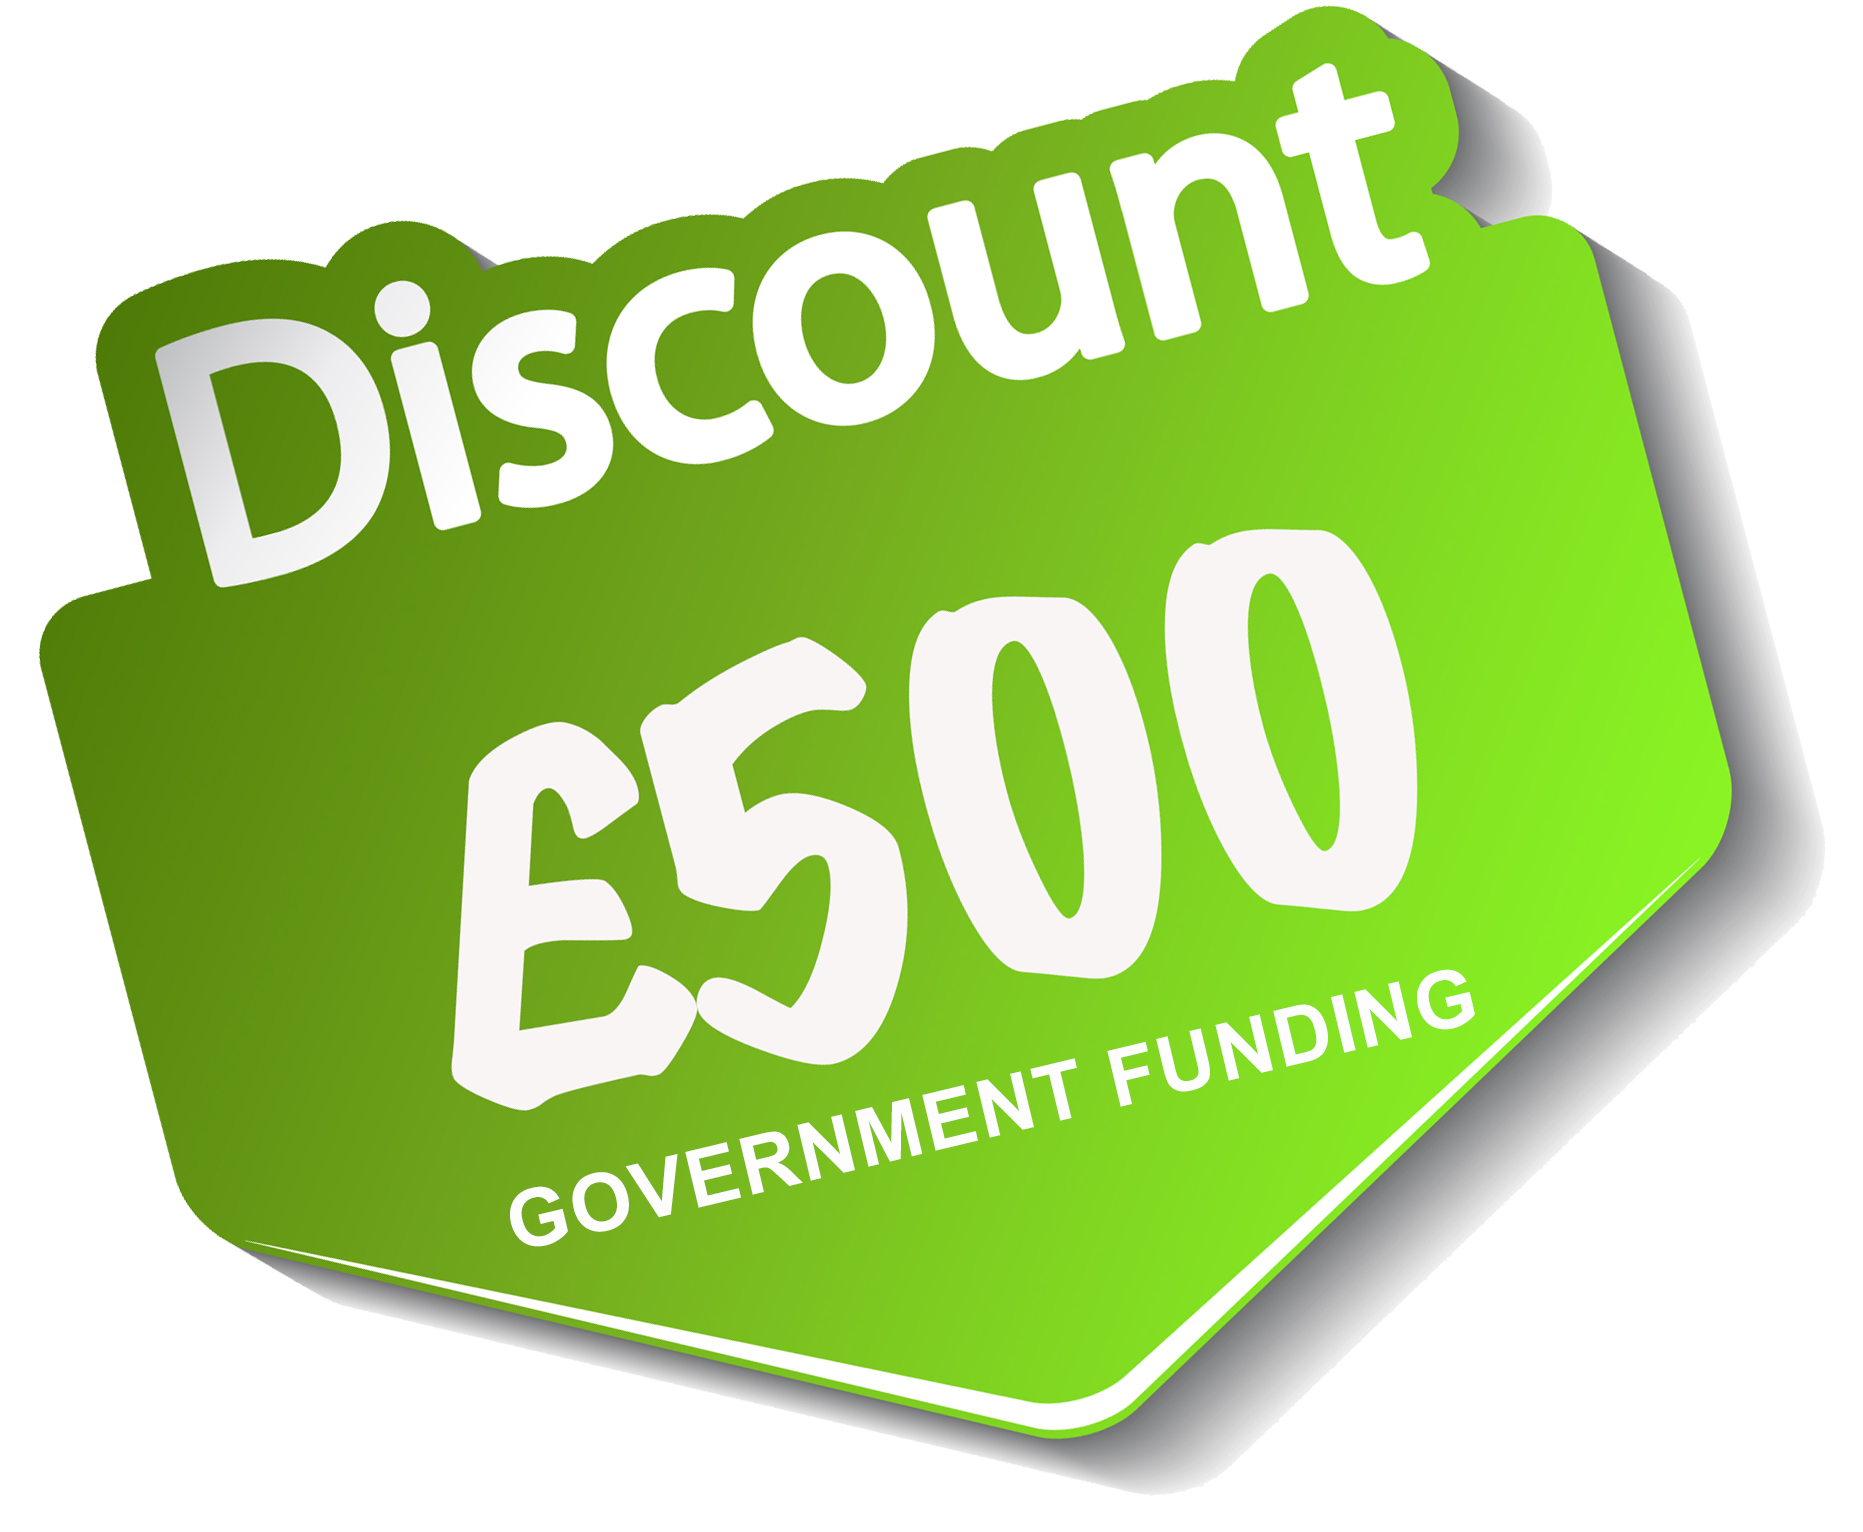 green sticker with government funding saving of £500 of ASHP courses